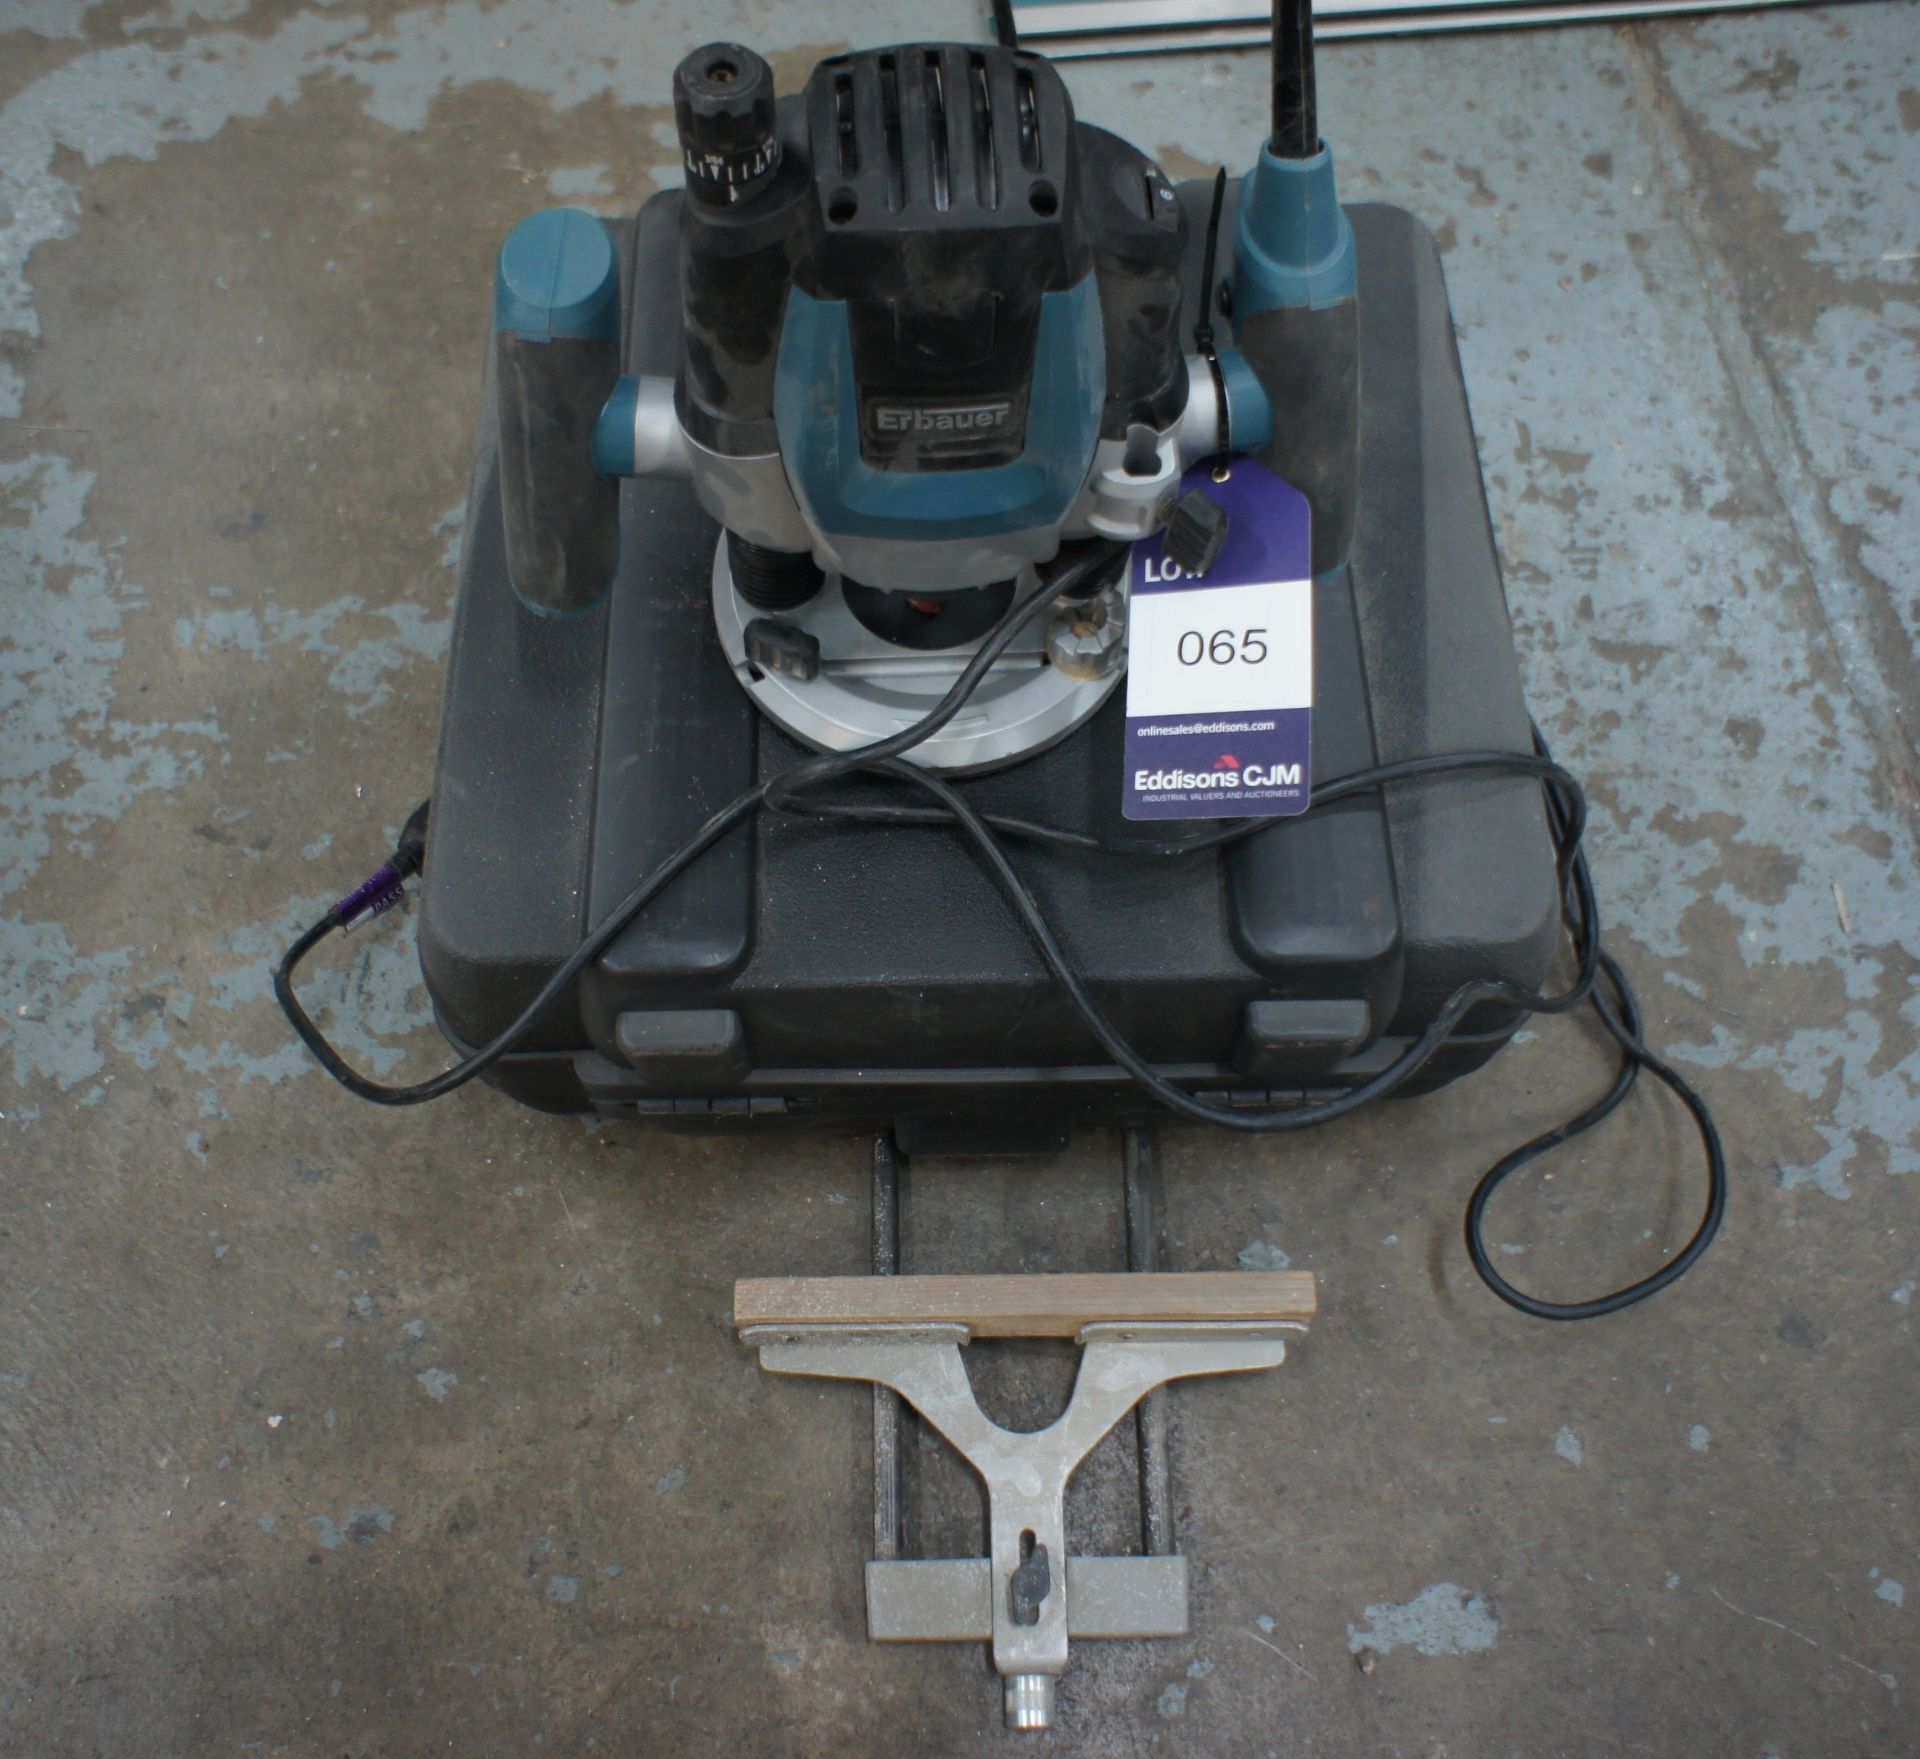 Erbauer ERB380ROU router 240volts - Image 2 of 2